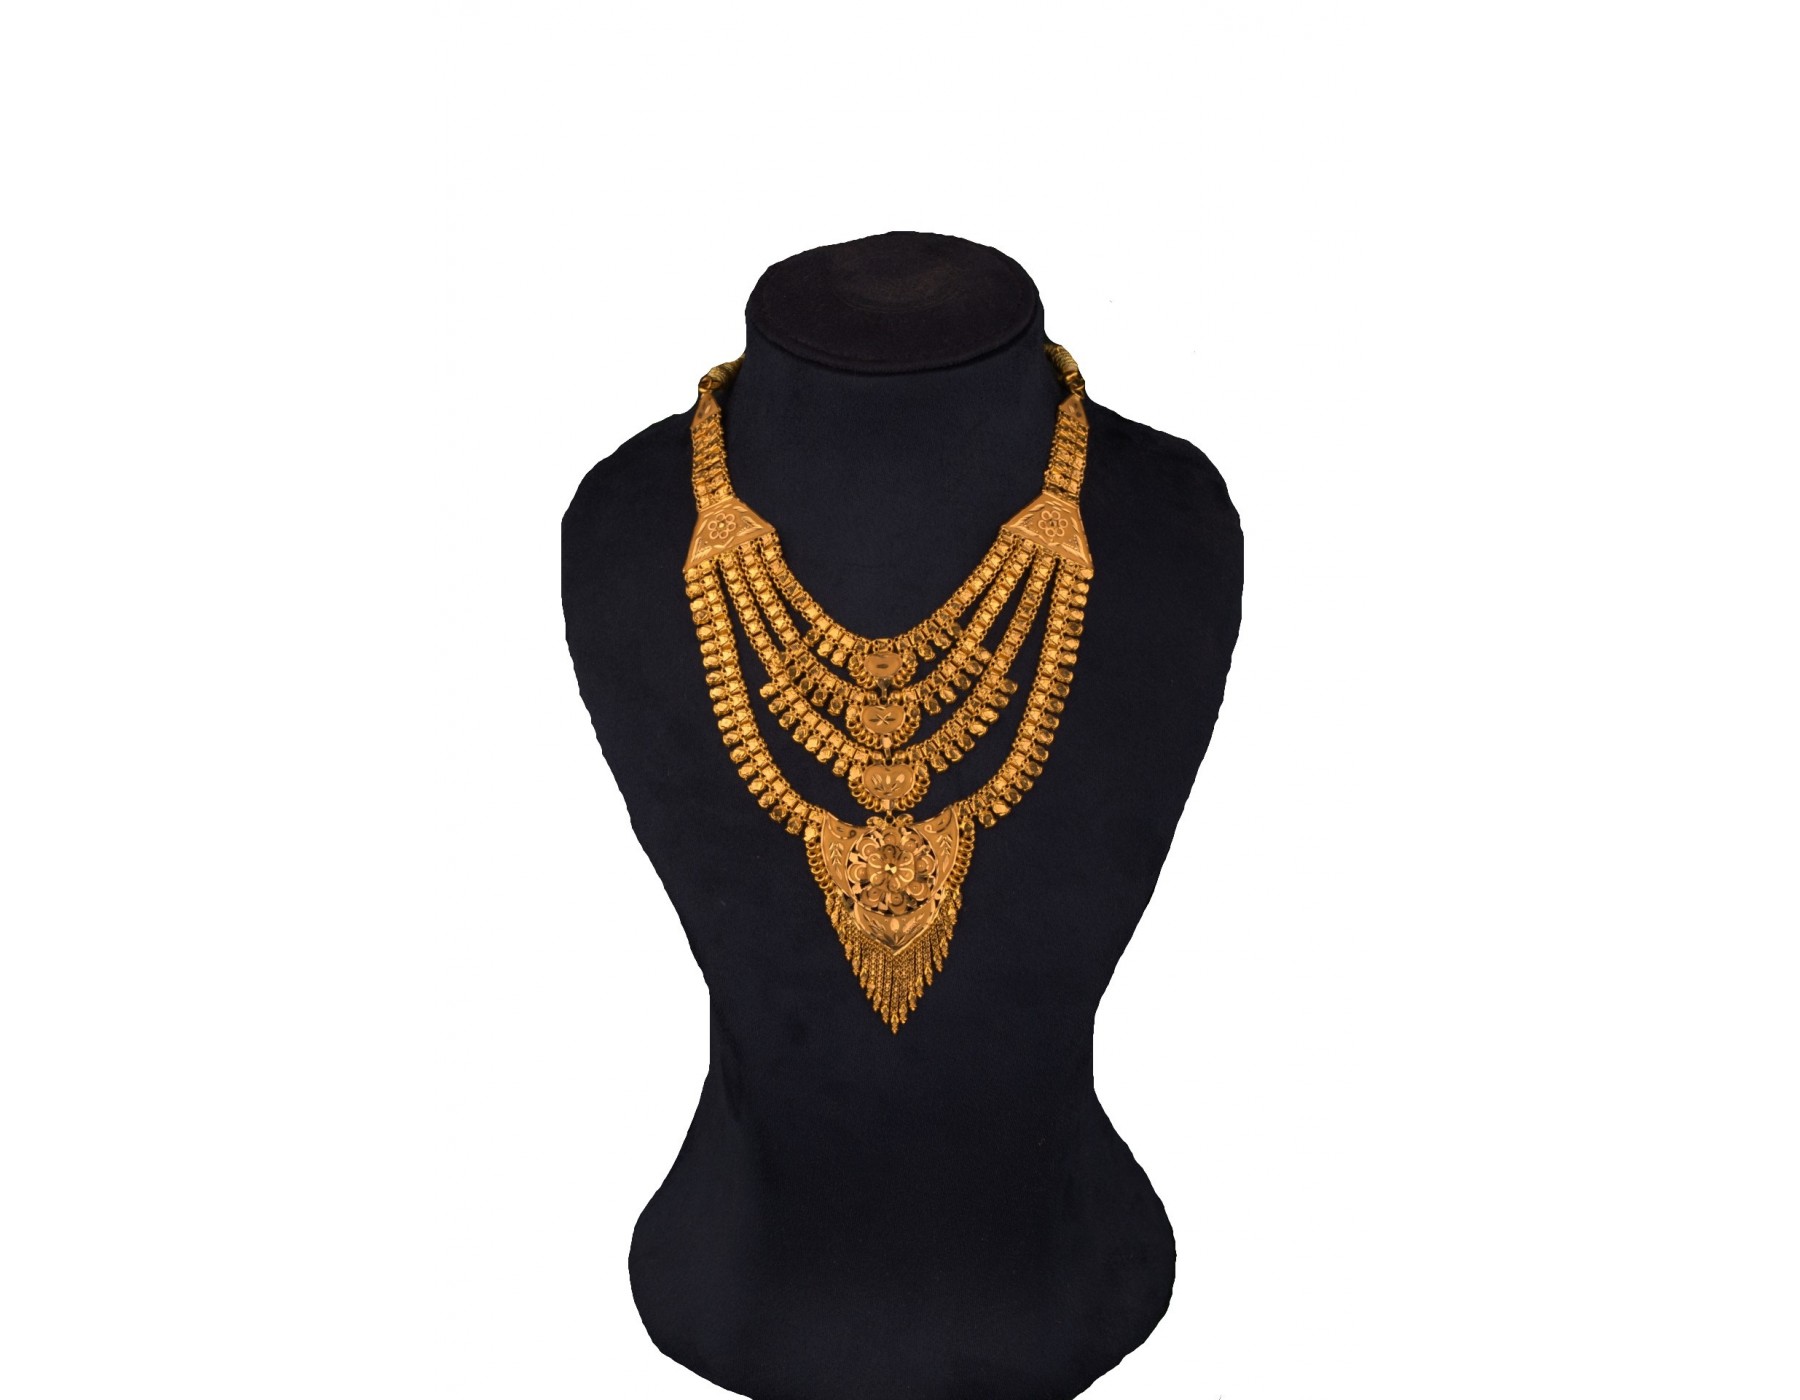 22KT Gold 3 Layer Bengali necklace